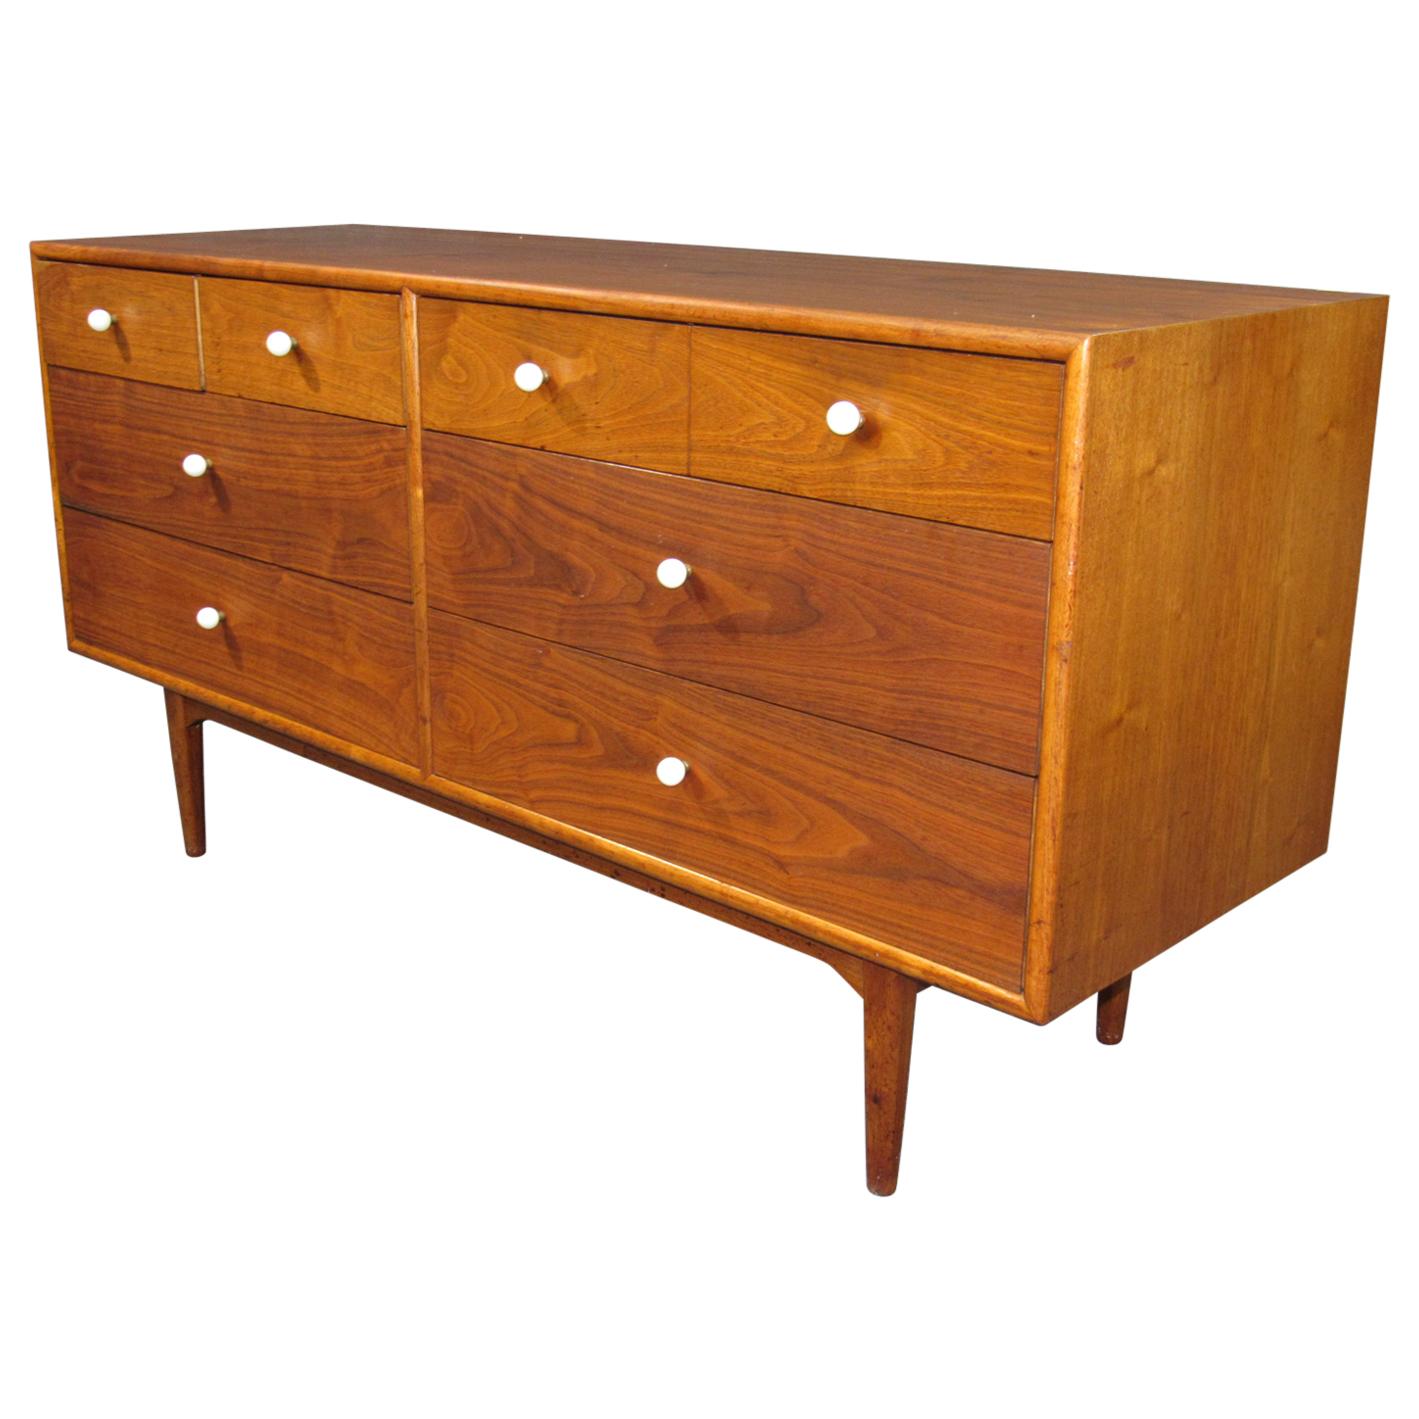 Midcentury Walnut Low and Long Chest of Drawers by Kipp Stewart for Drexel